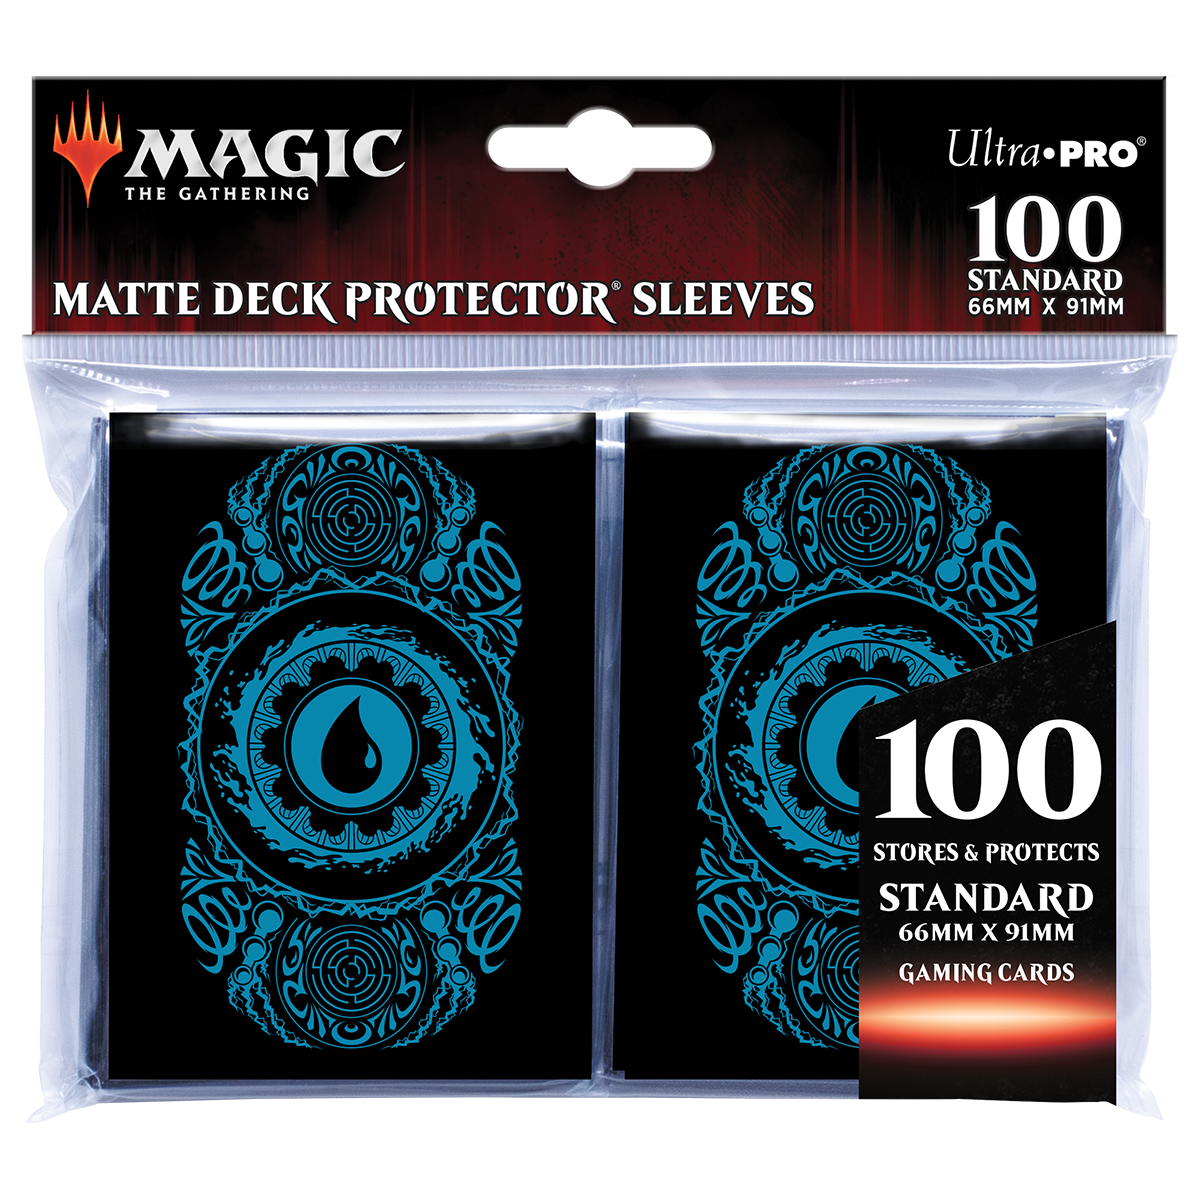 Mana 7 Island Deck Protector Sleeves (100ct) for Magic: The Gathering | Ultra PRO International